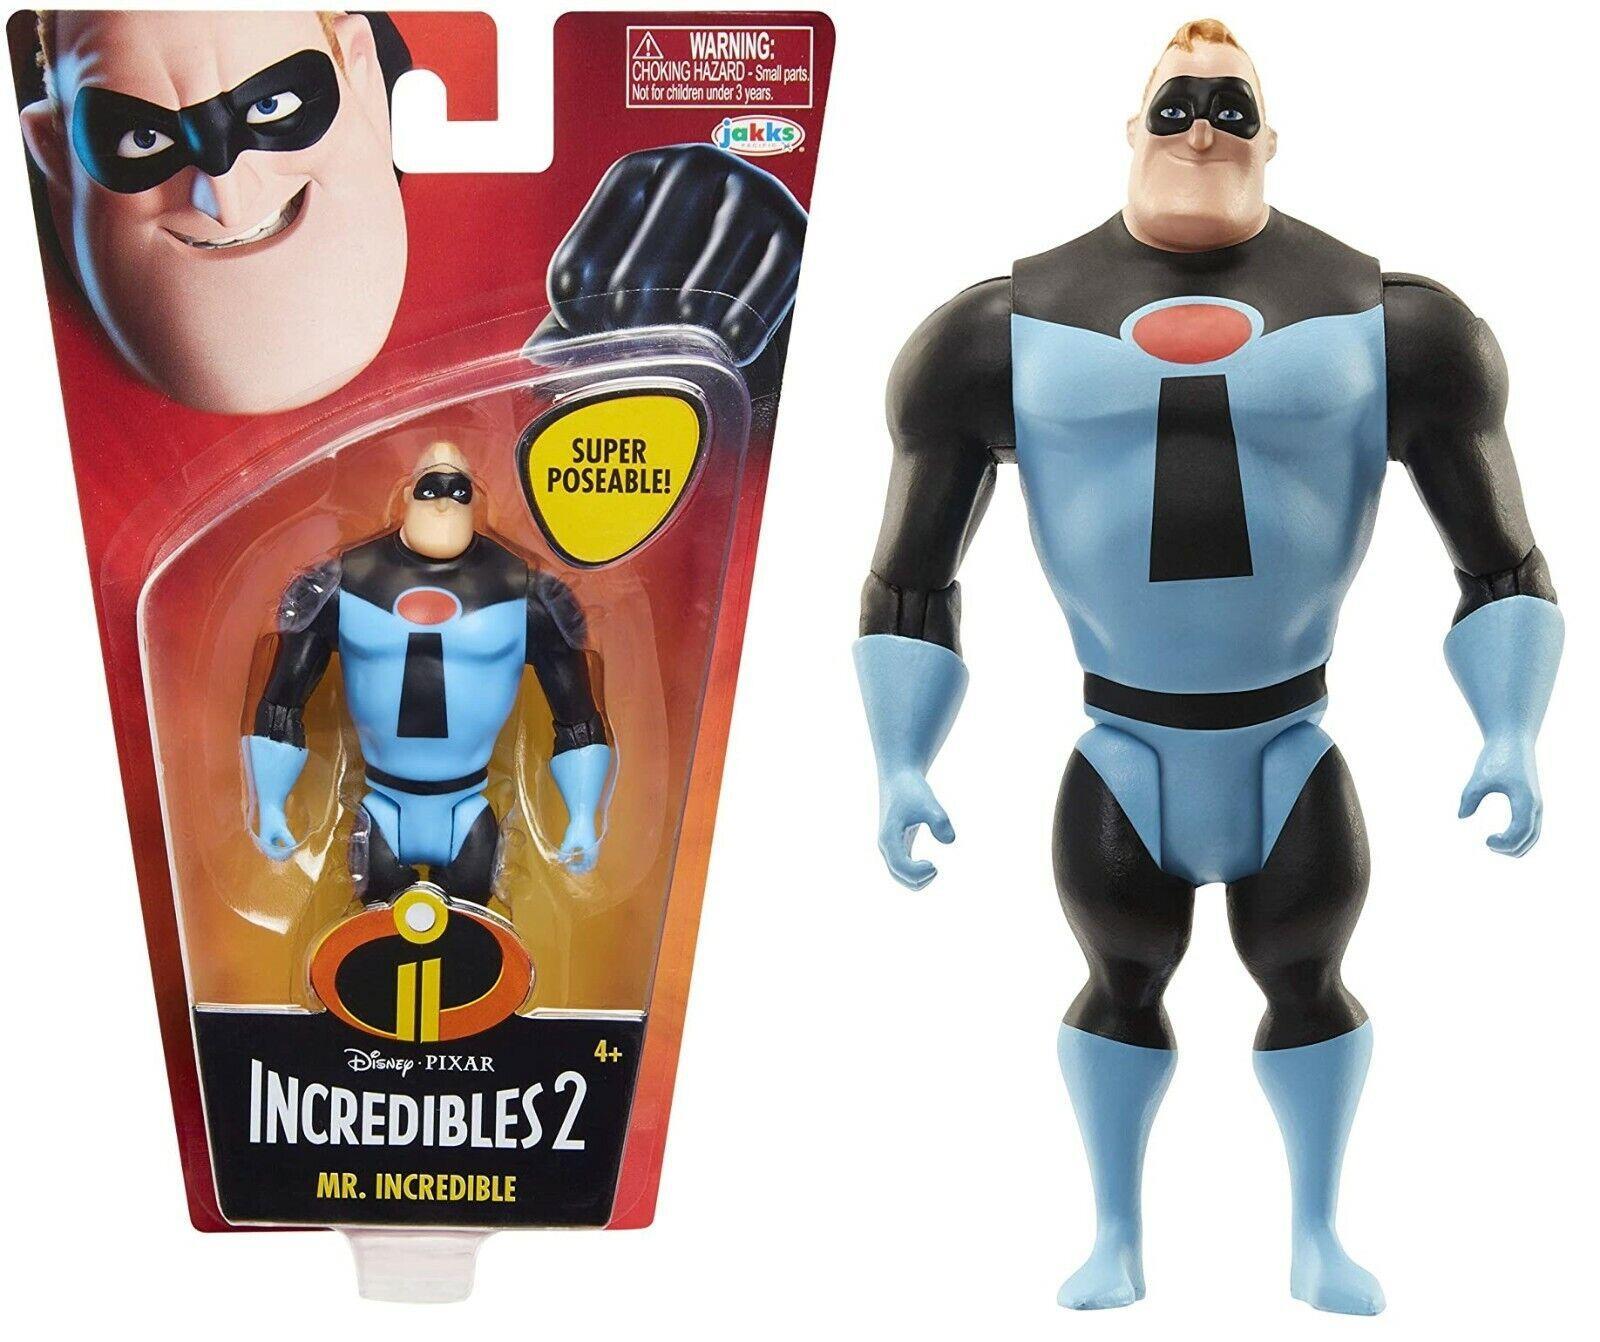 Incredibles 2 Disney Pixar Mr. Incredible Super poseable Action figure for Ages 4+